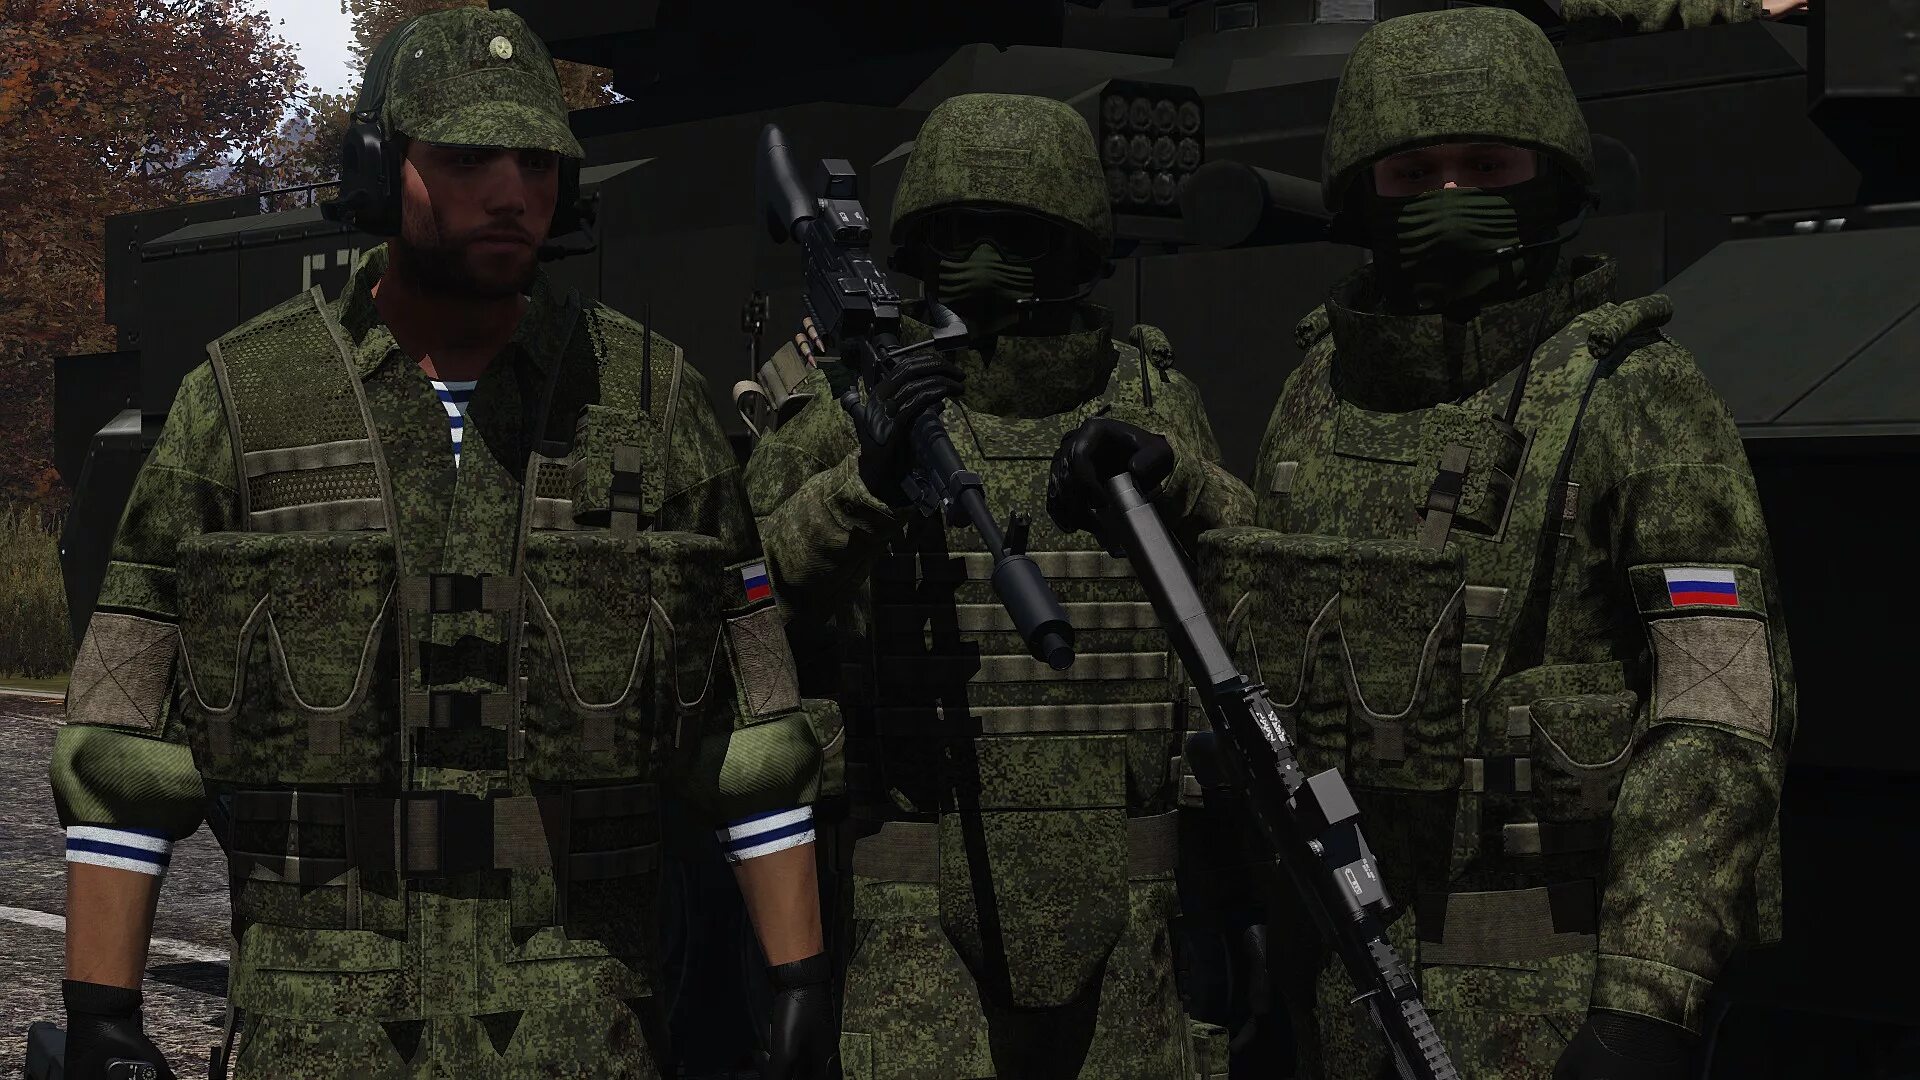 Order forces. Арма 3 армия РФ. Arma 3 армия РФ 2035. Арма 3 Russian Armed Forces 2035. Армия РФ Арма 2.